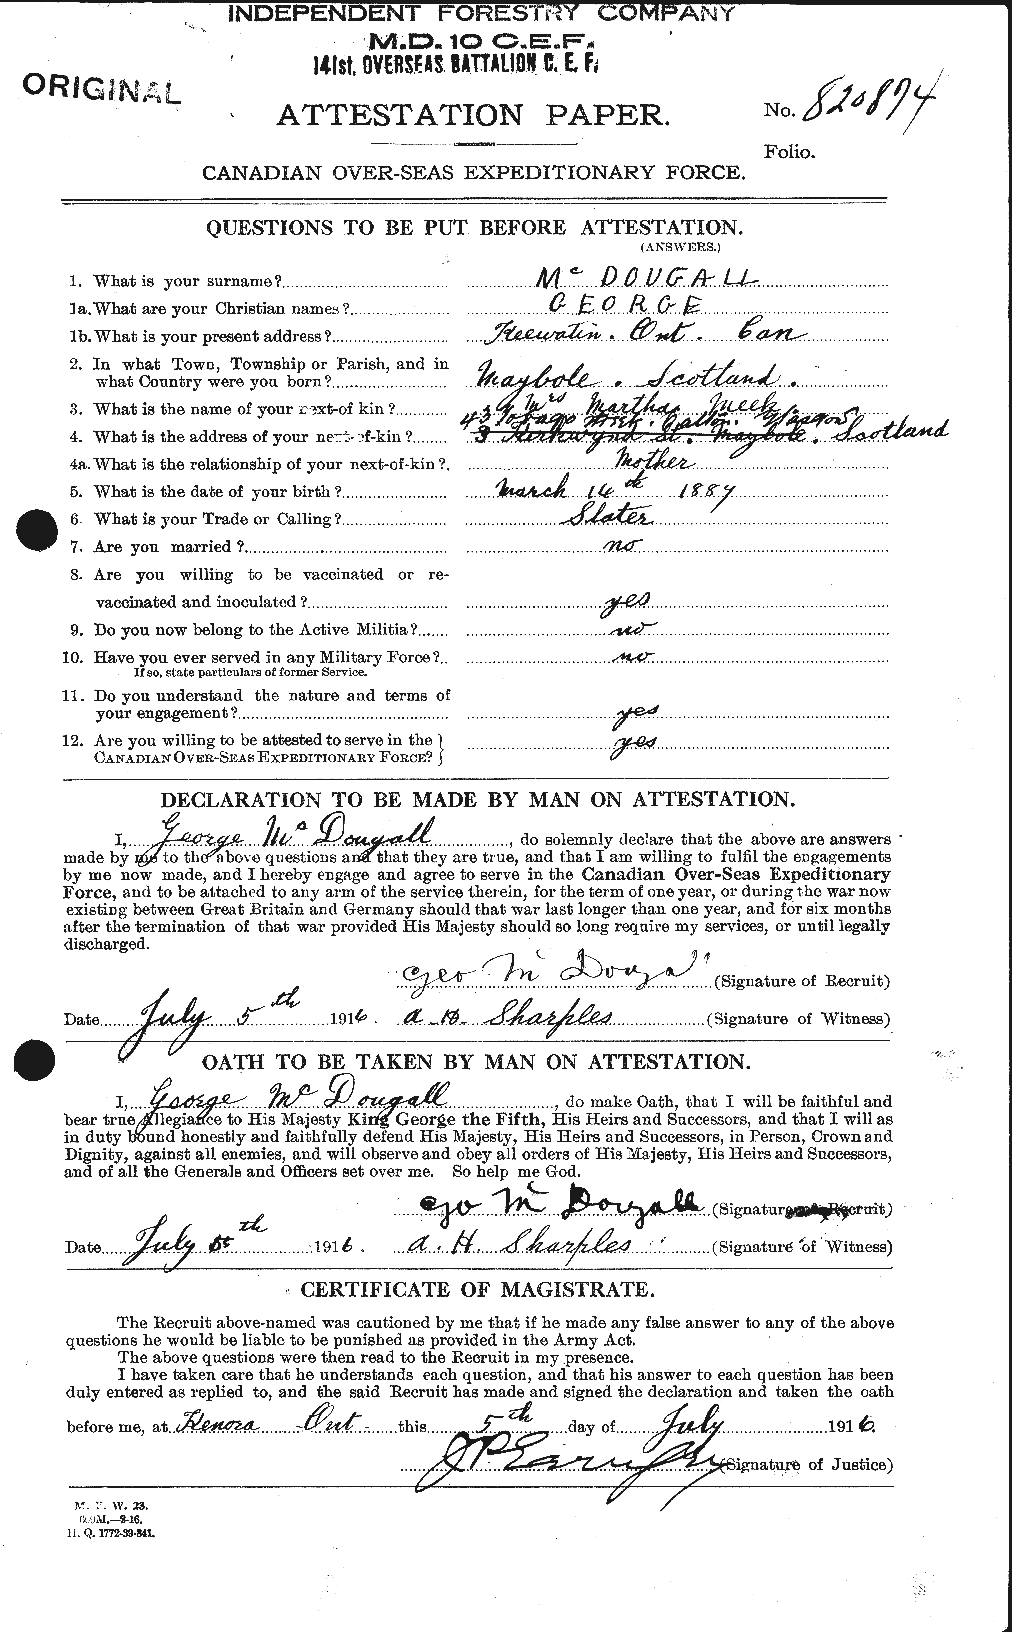 Personnel Records of the First World War - CEF 518111a